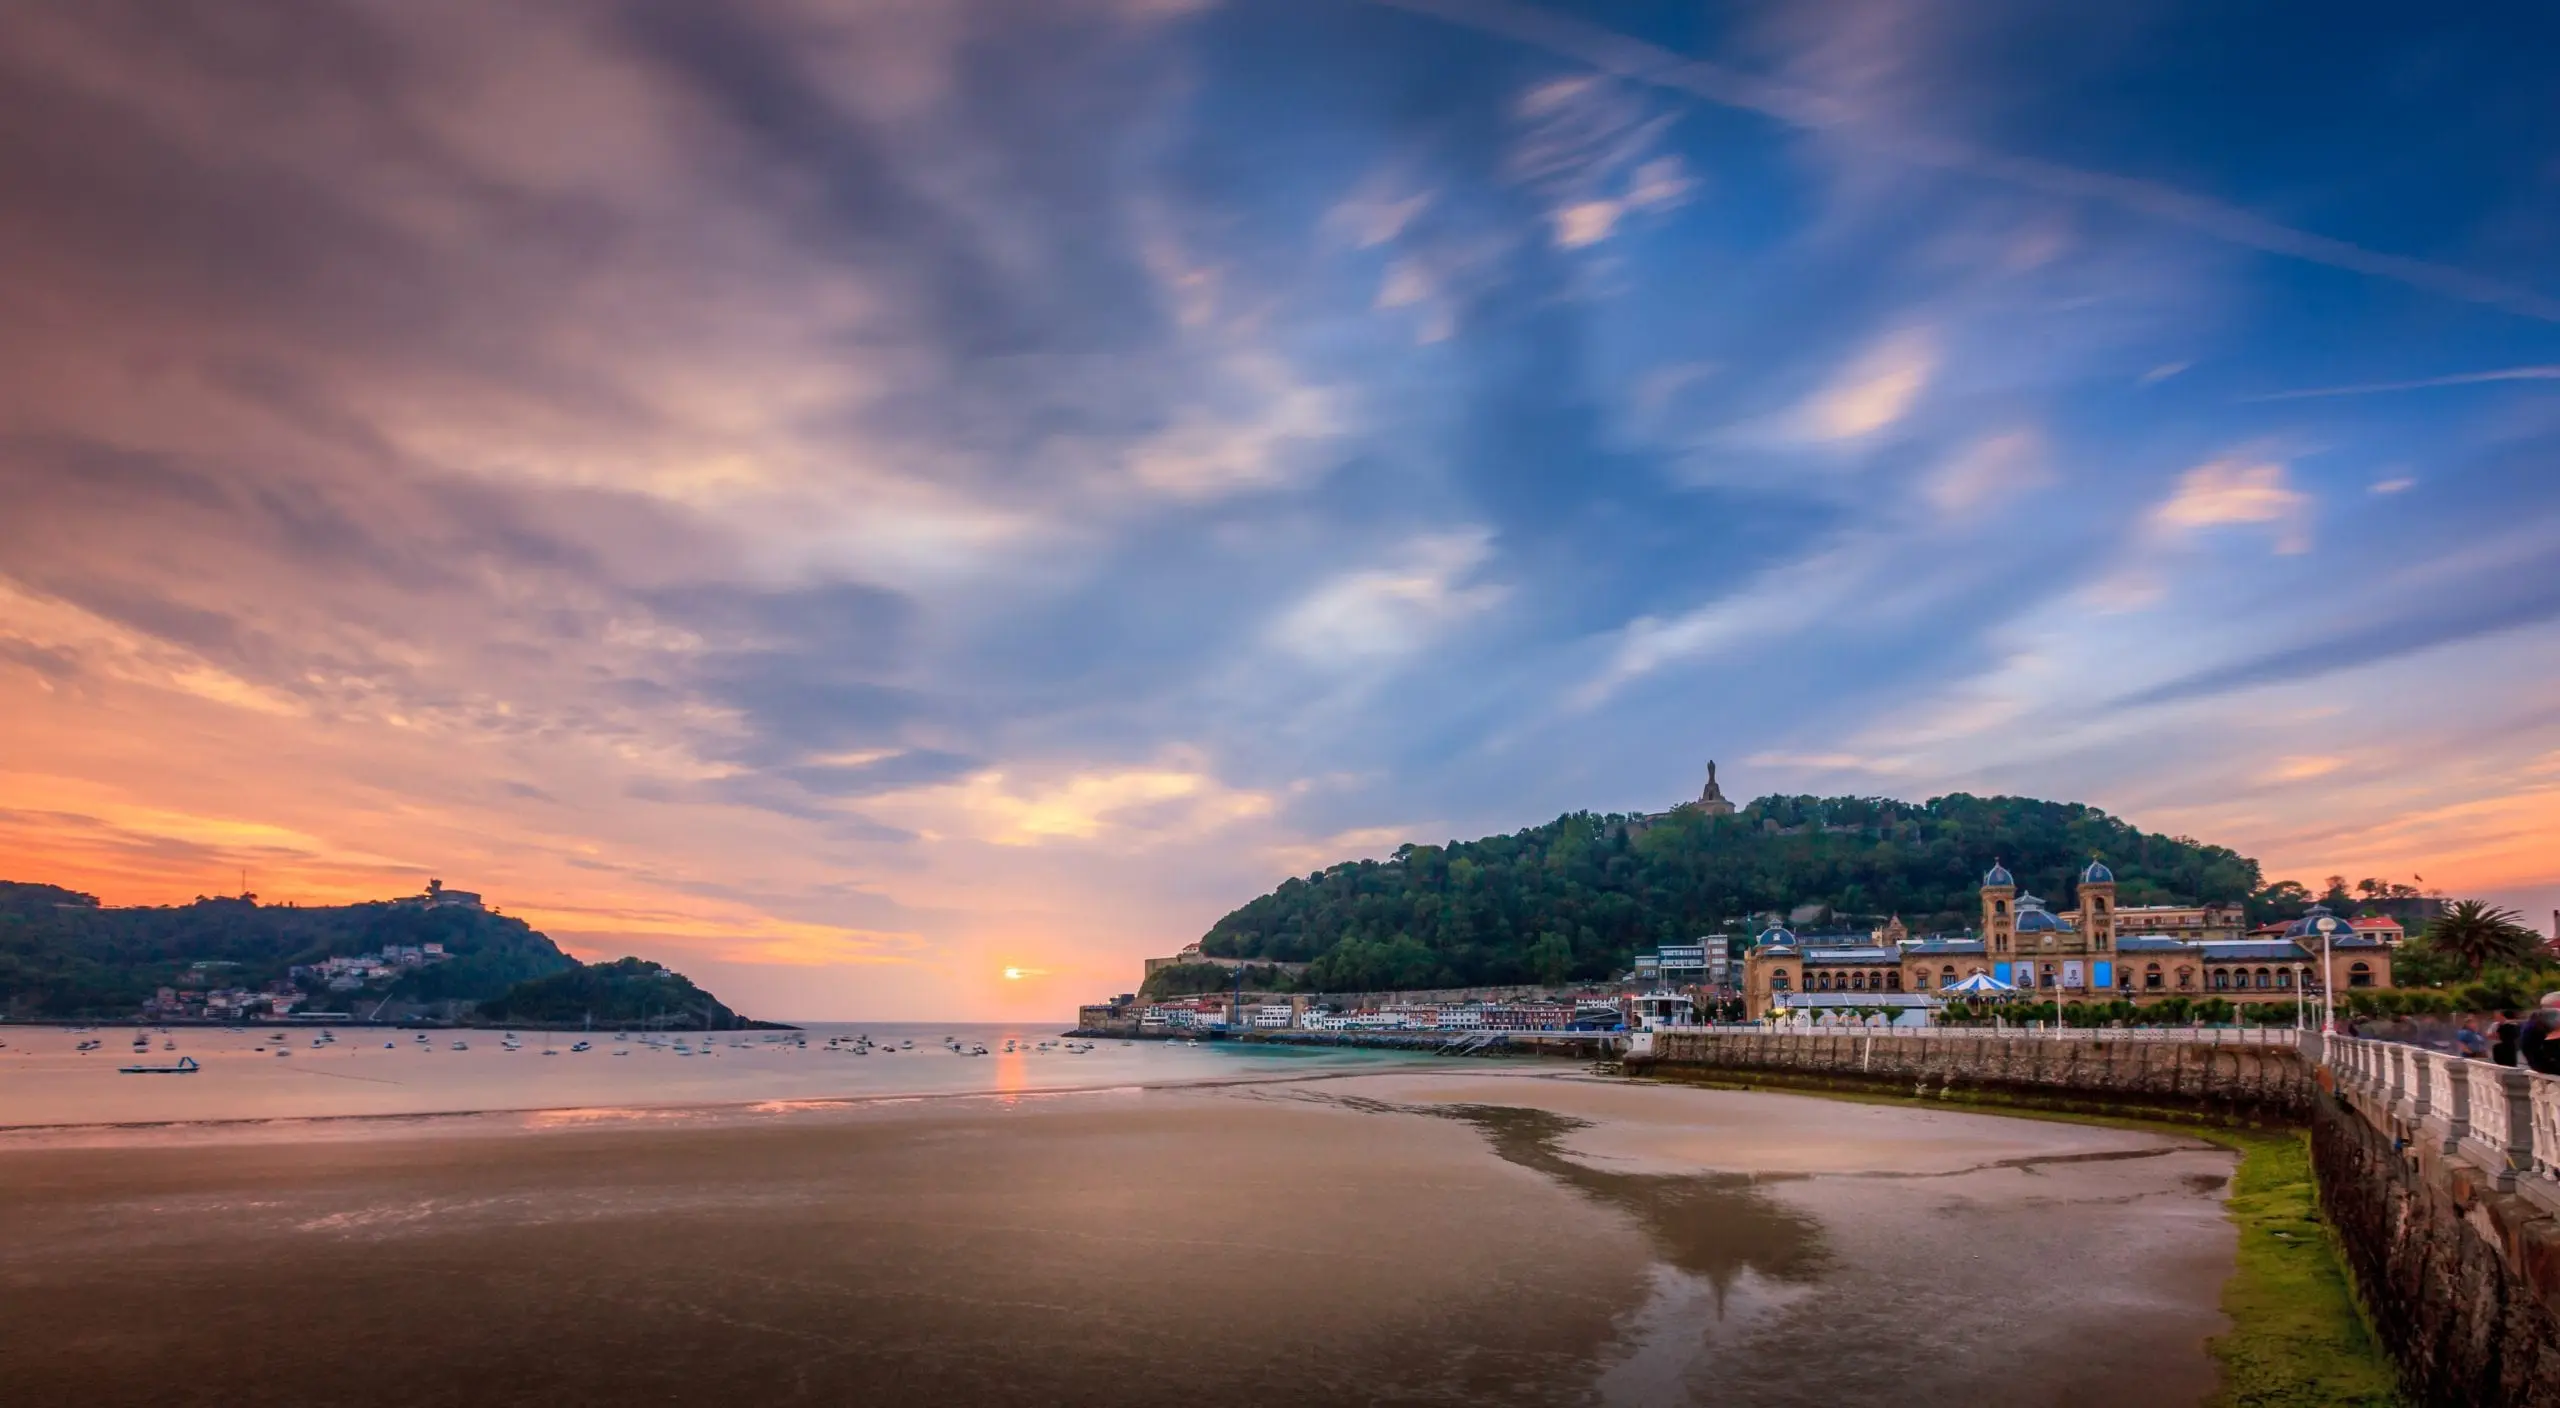 how much is a taxi from bilbao to san sebastian - What is the easiest way to get to San Sebastian